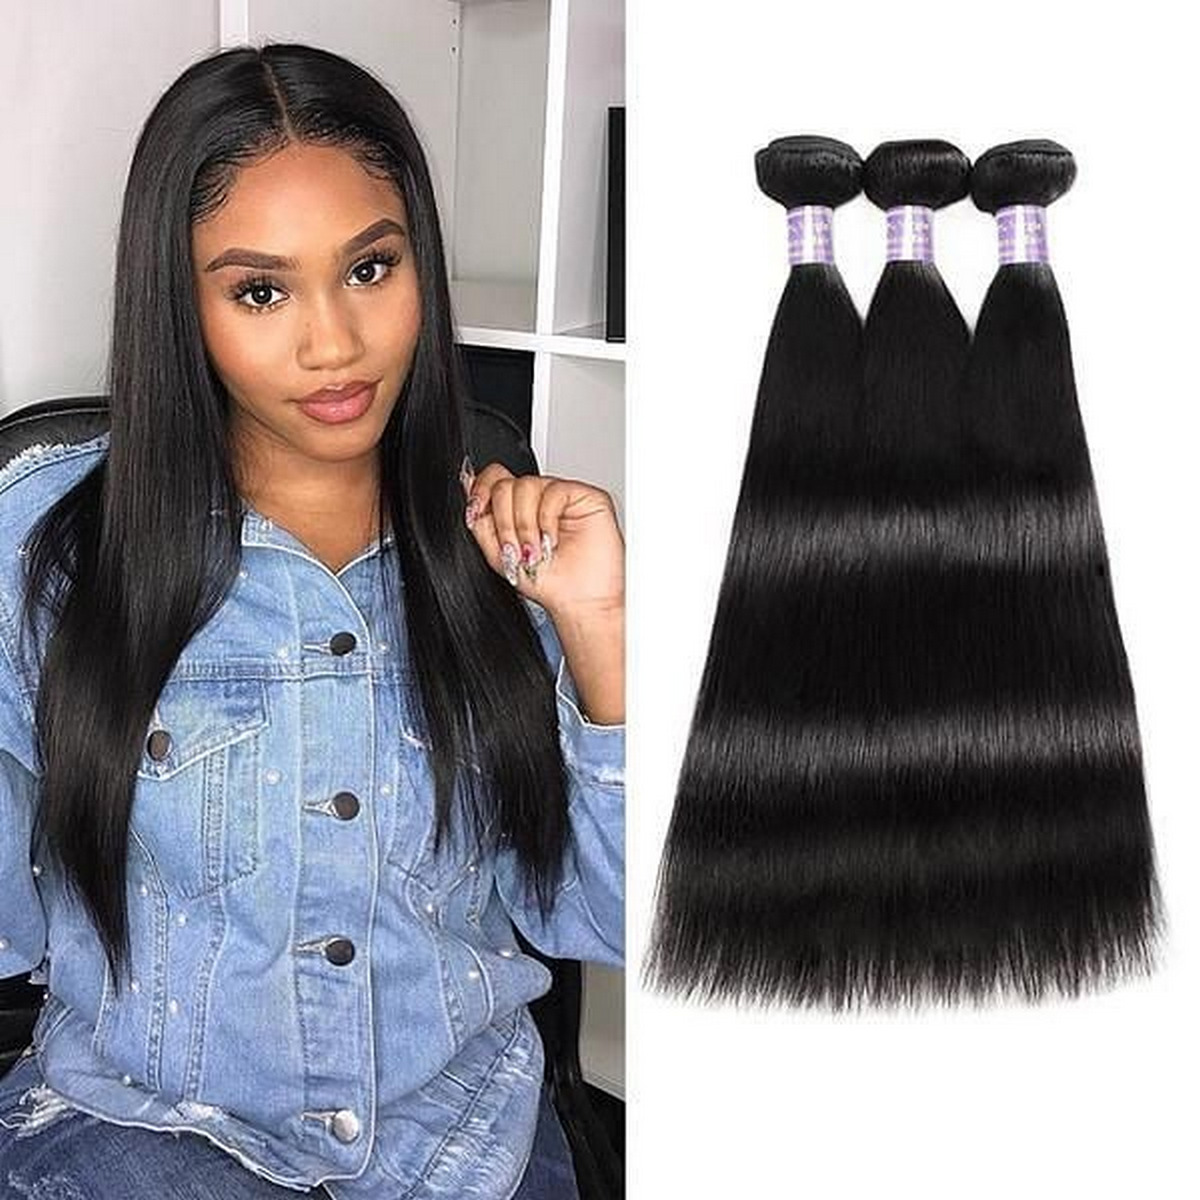 Natural straight black hair for type 3b